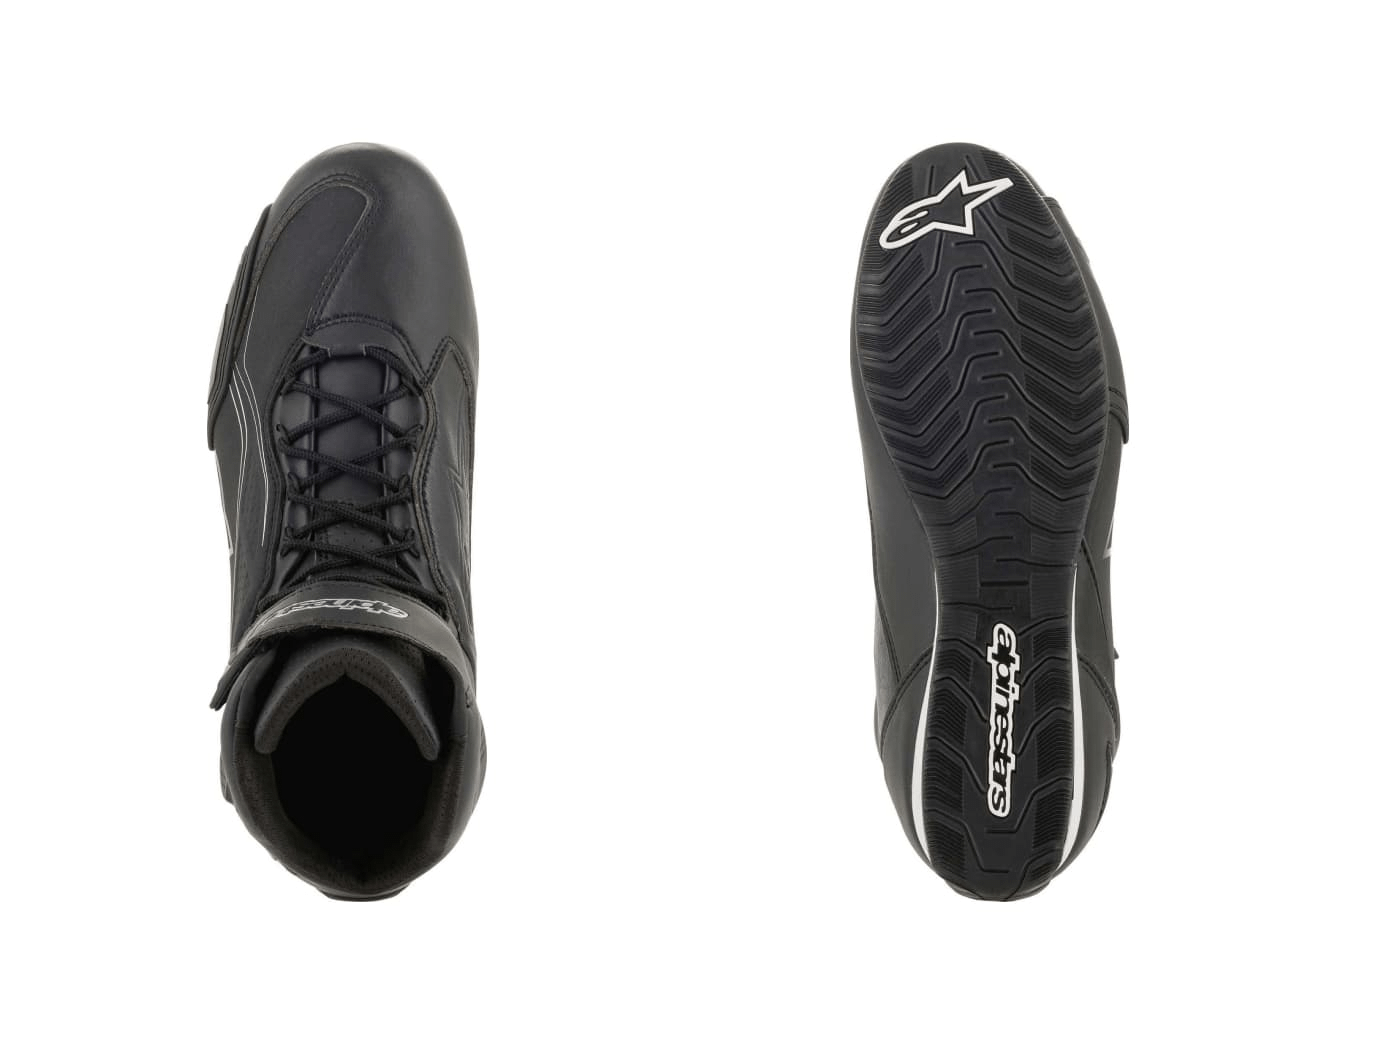 Top down and sole of the Alpinestars Faster 3 in Black/Black